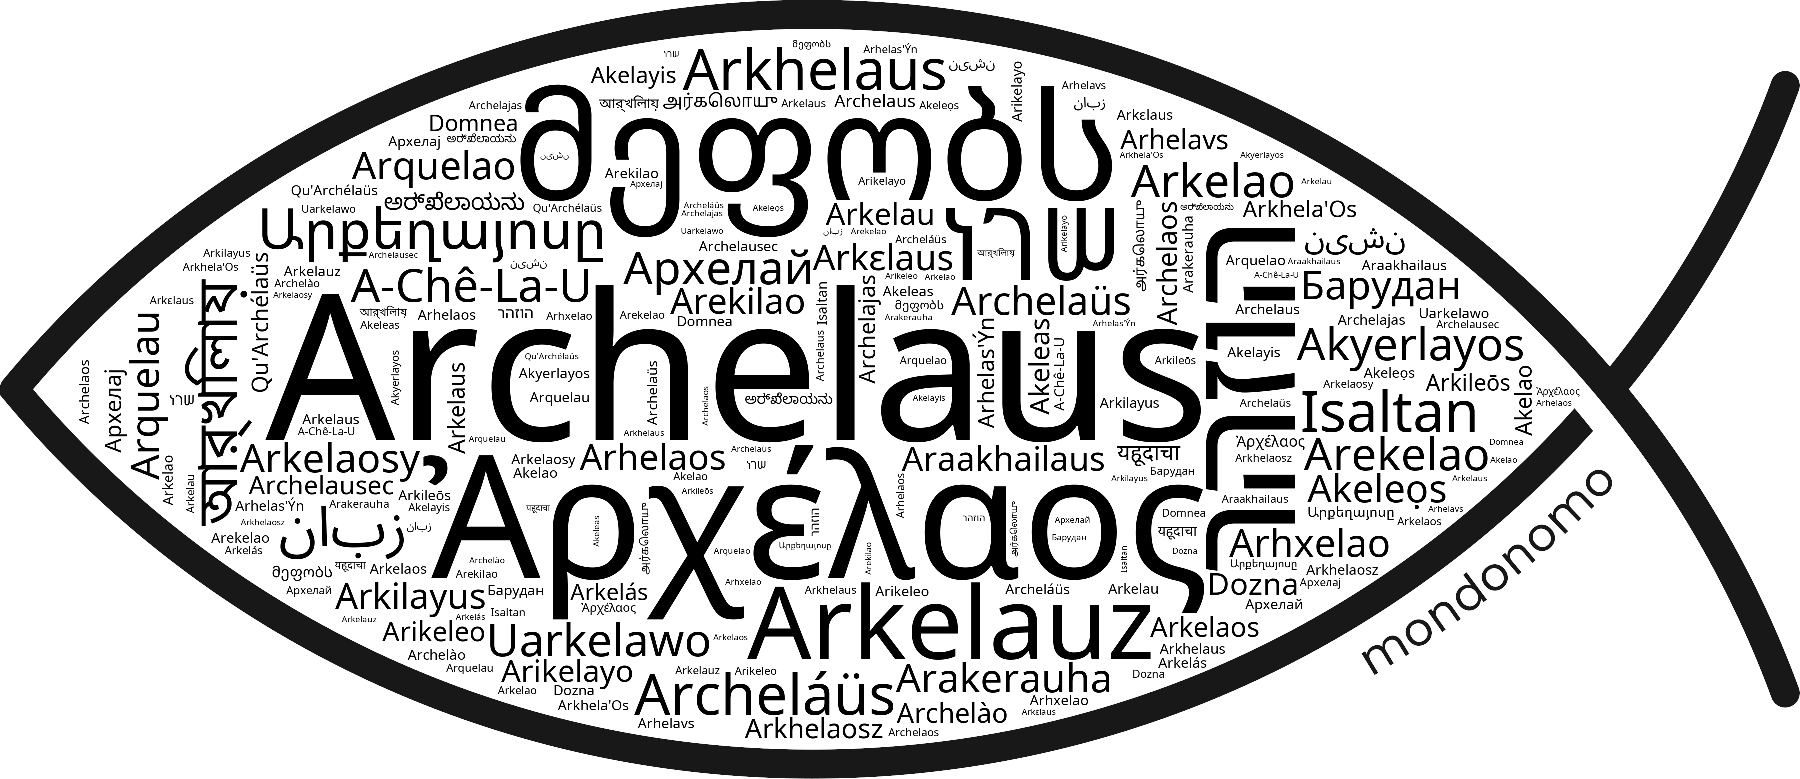 Name Archelaus in the world's Bibles